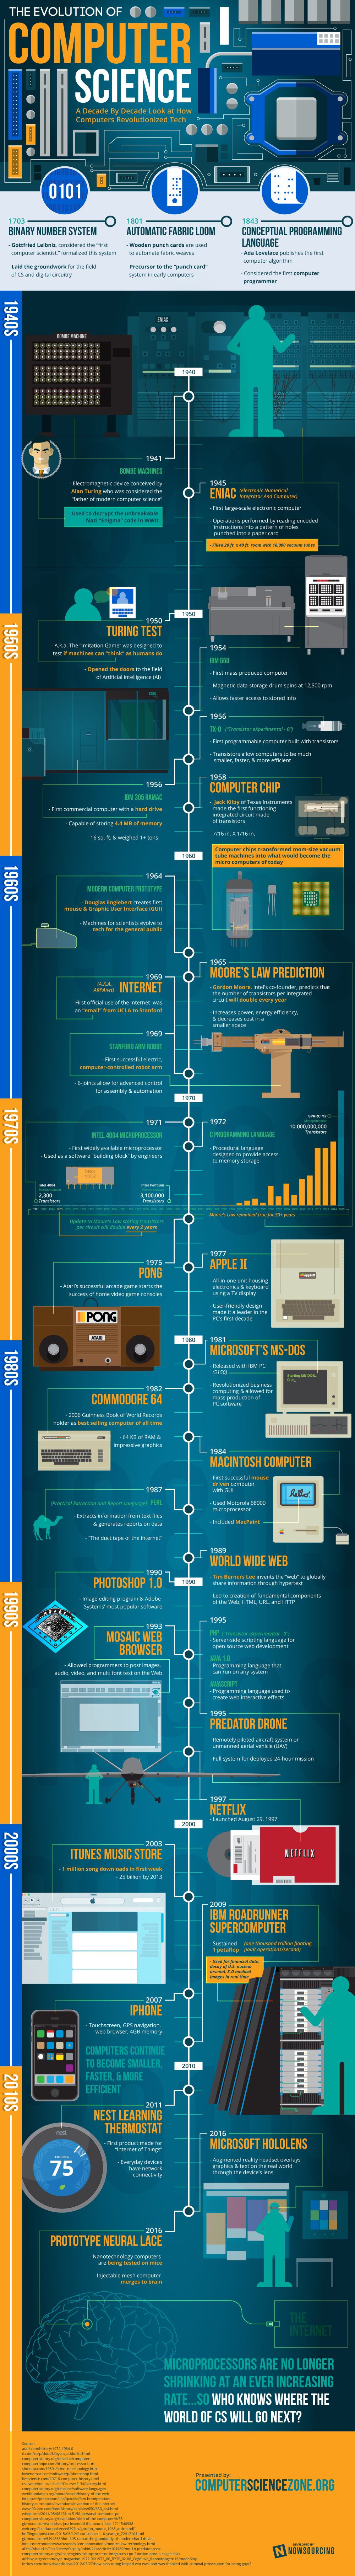 The Evolution of computer Science